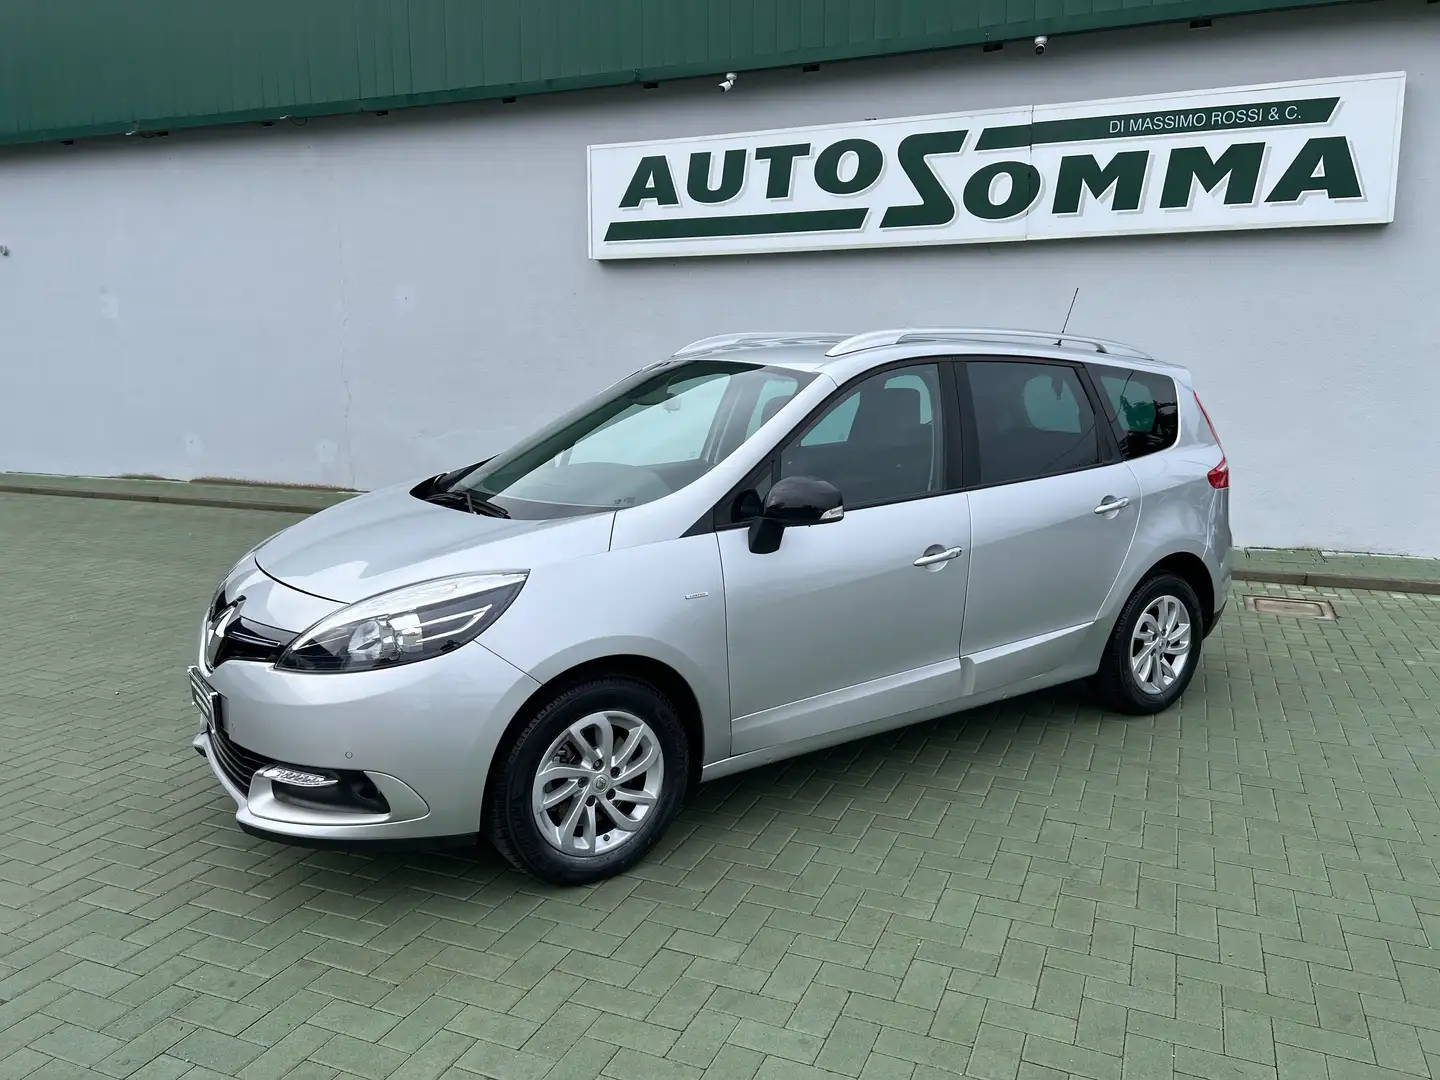 Renault Scenic 1.5 dci Limited  SOLI 18000 KM!! INTROVABILE!! Argento - 1